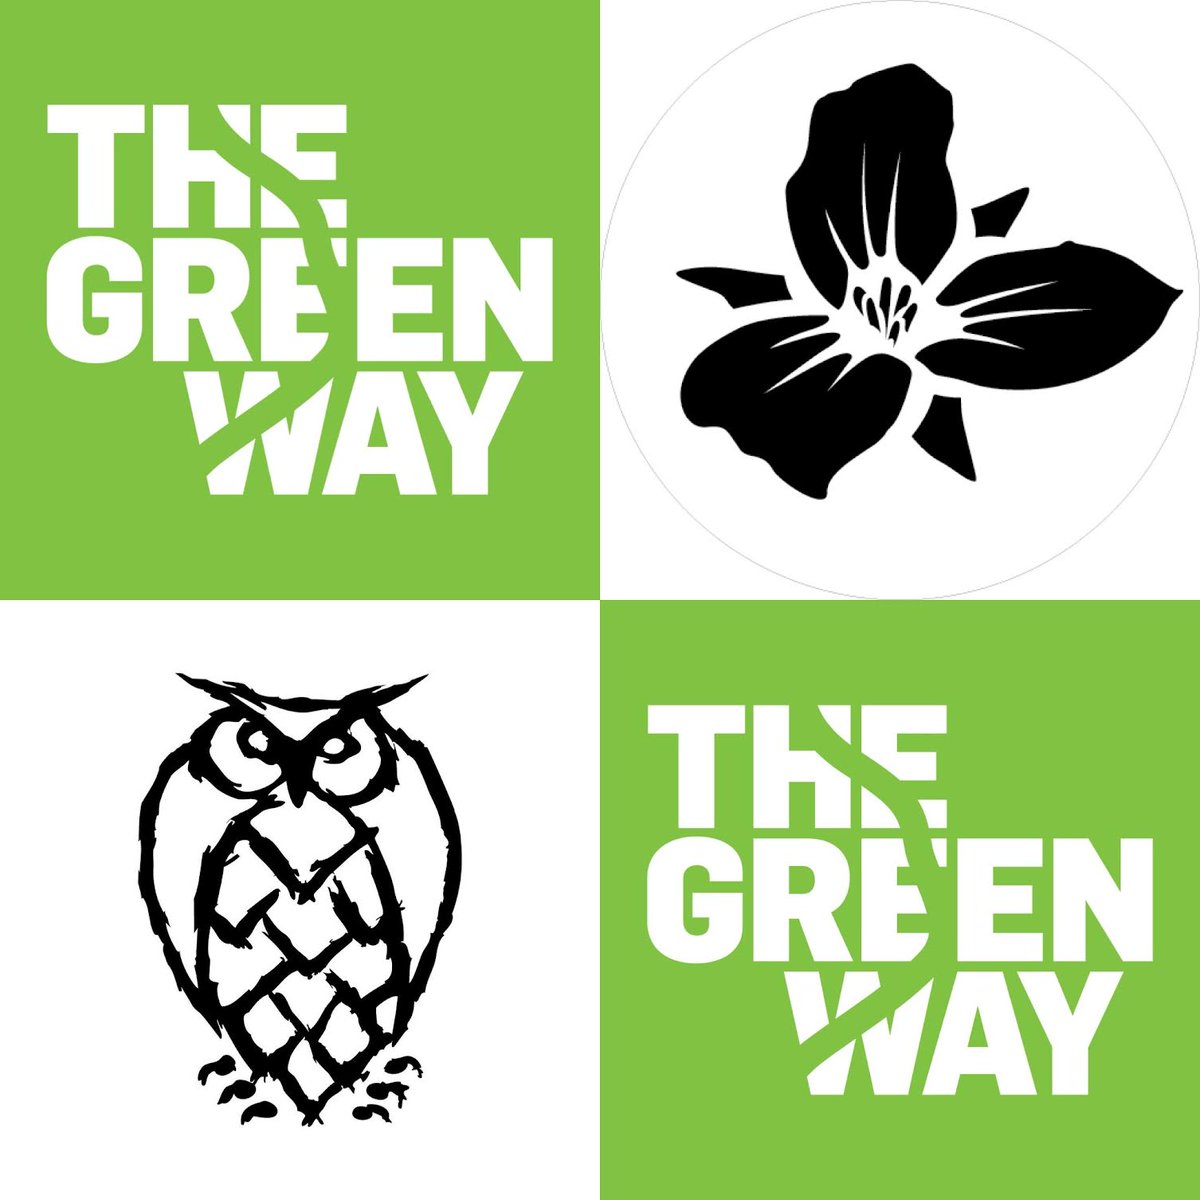 BEER GARDEN NEWS!! A new pop-up @NightShiftBeer #beergarden in #DeweySquare and the return of the popular @trilliumbrewing Garden on the Greenway by #RowesWharf brings in another season of local brews on #TheGreenway Details Here: massbrewbros.com/rose-kennedy-g… @HelloGreenway